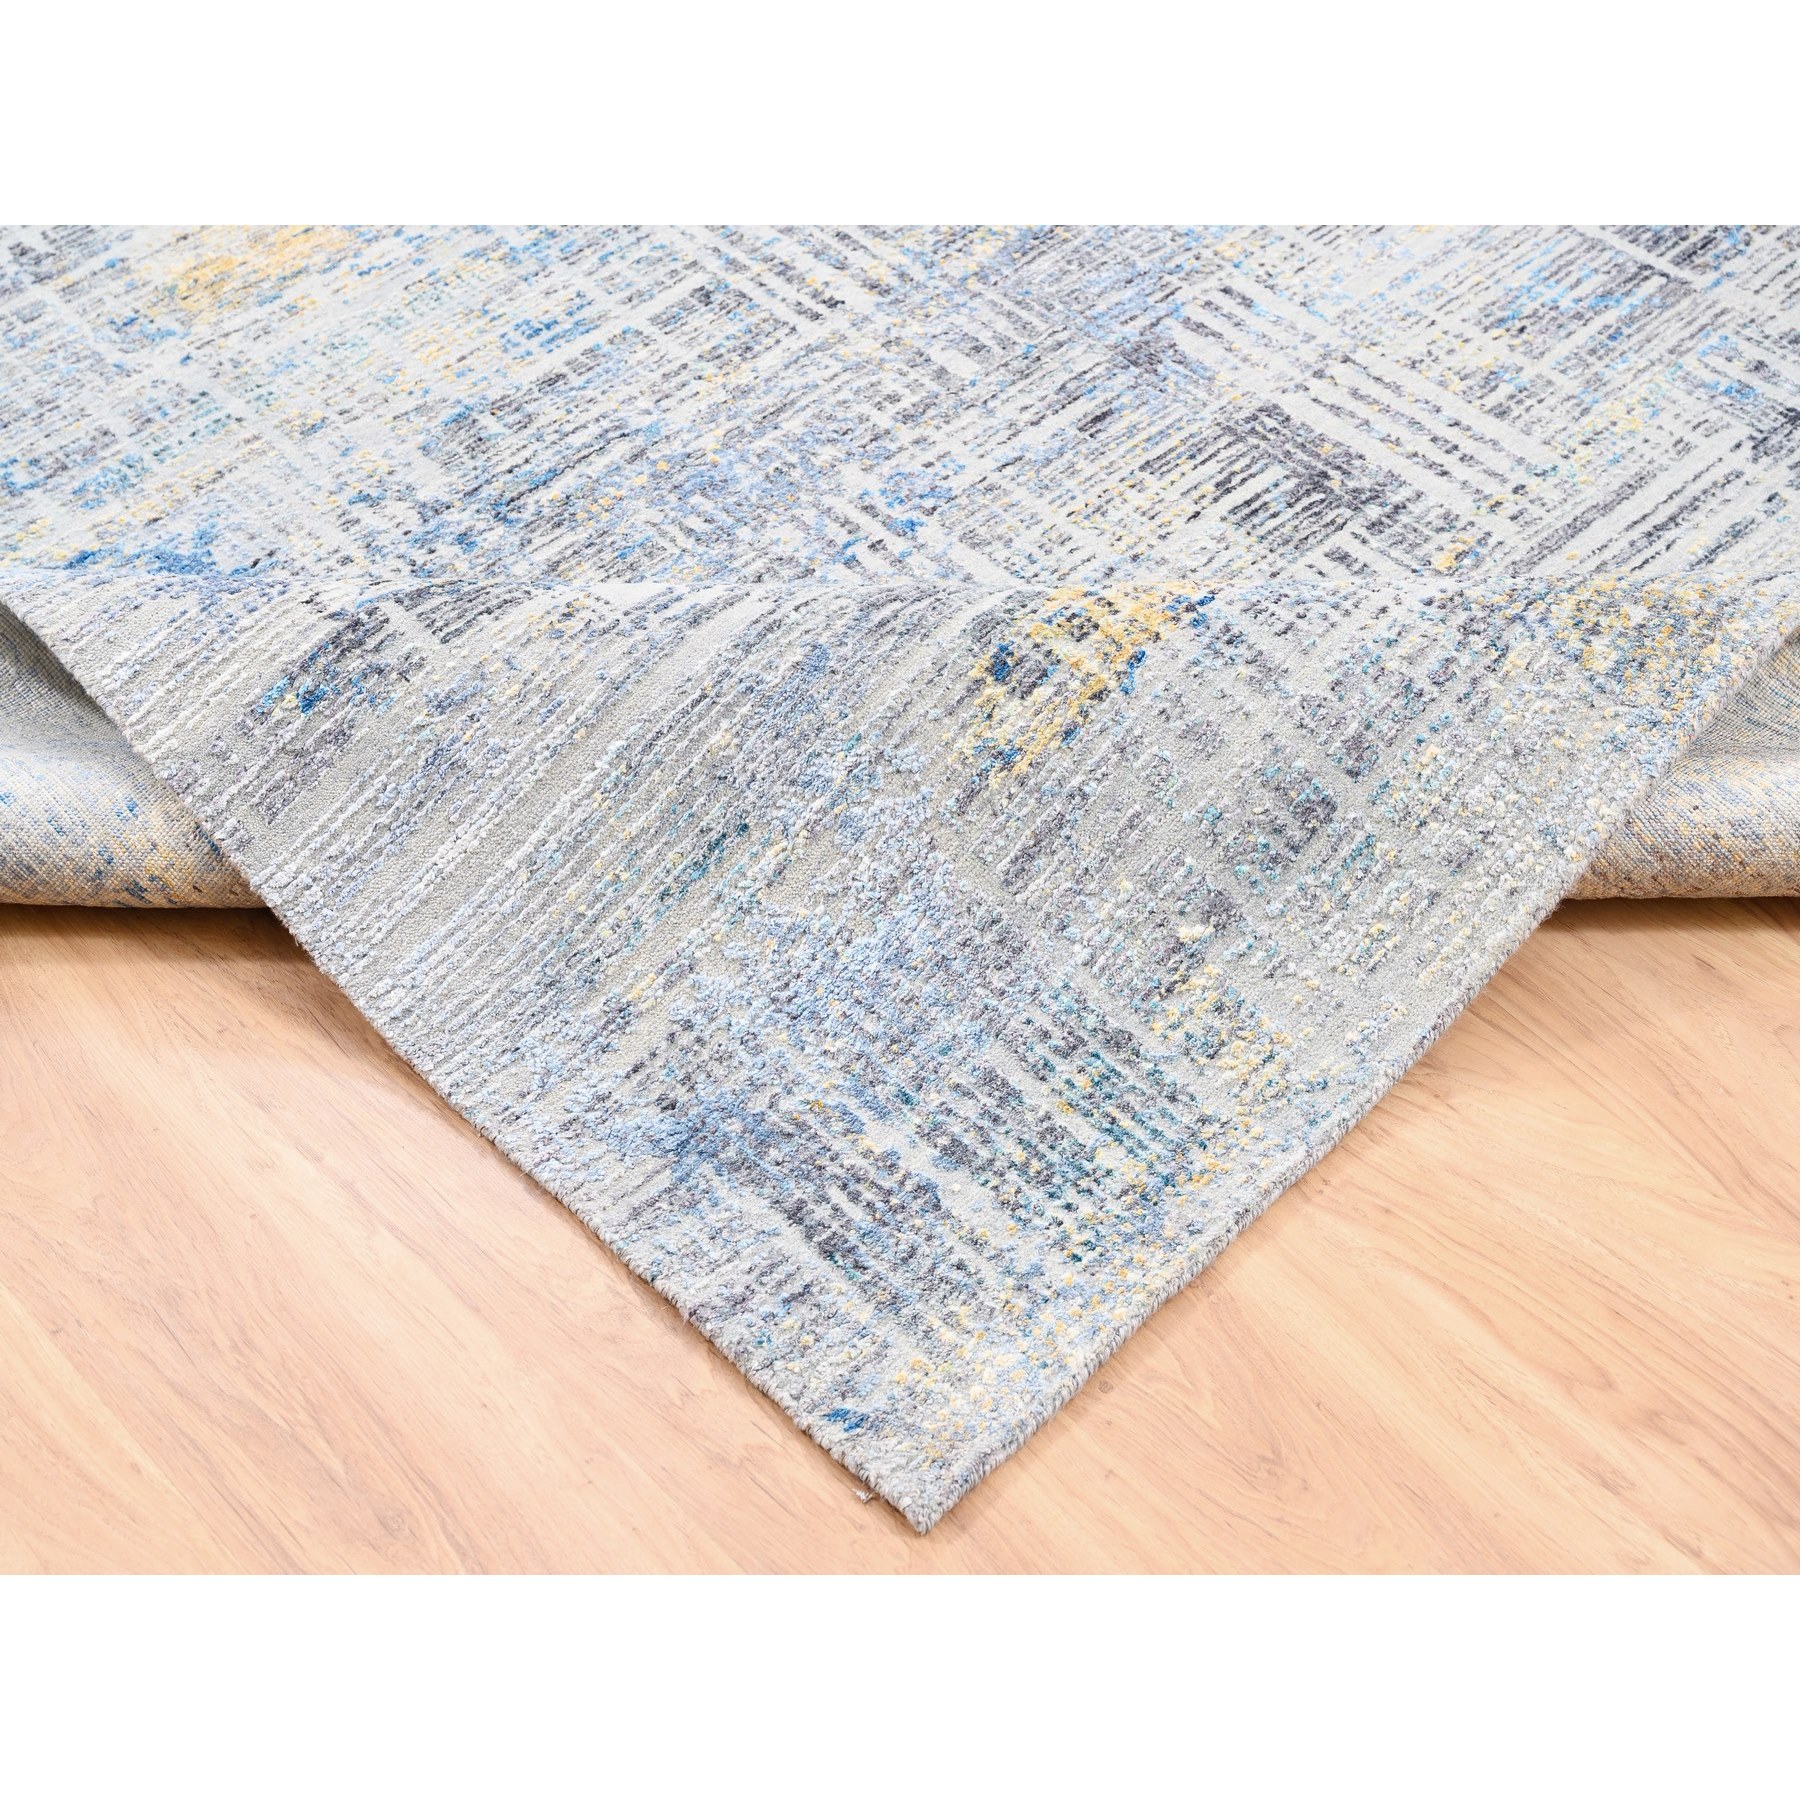 8'1"x10' Dark Gray with Touches of Blue and Yellow Modern Wool And Silk Hand Woven Oriental Rug 